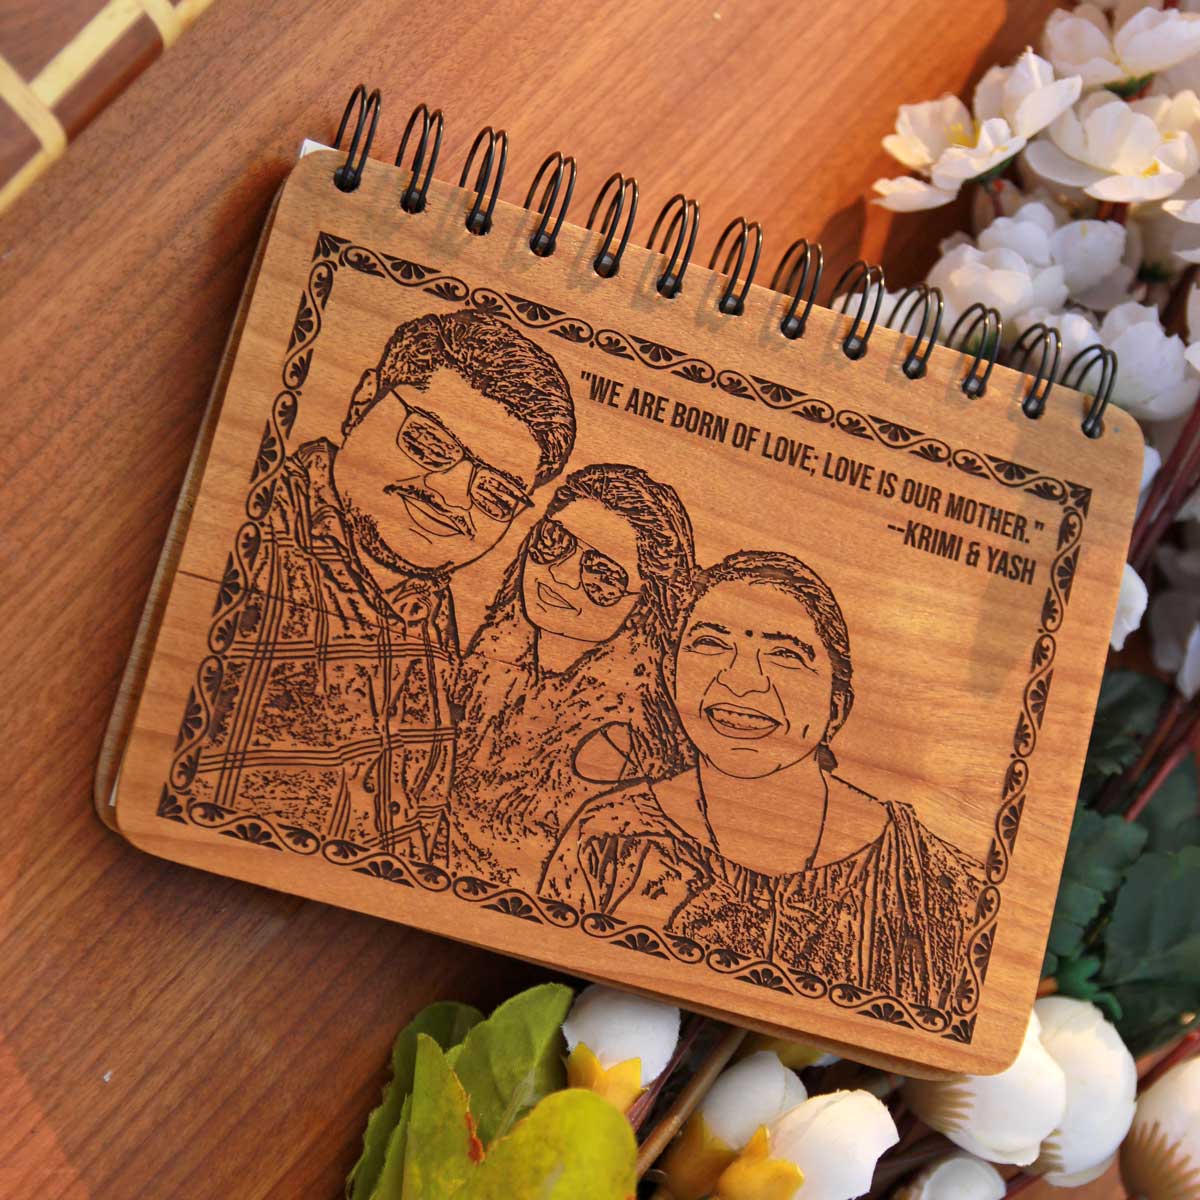 Happy Birthday Mom Wooden Notebook With Photo & Birthday Wishes In Any Language